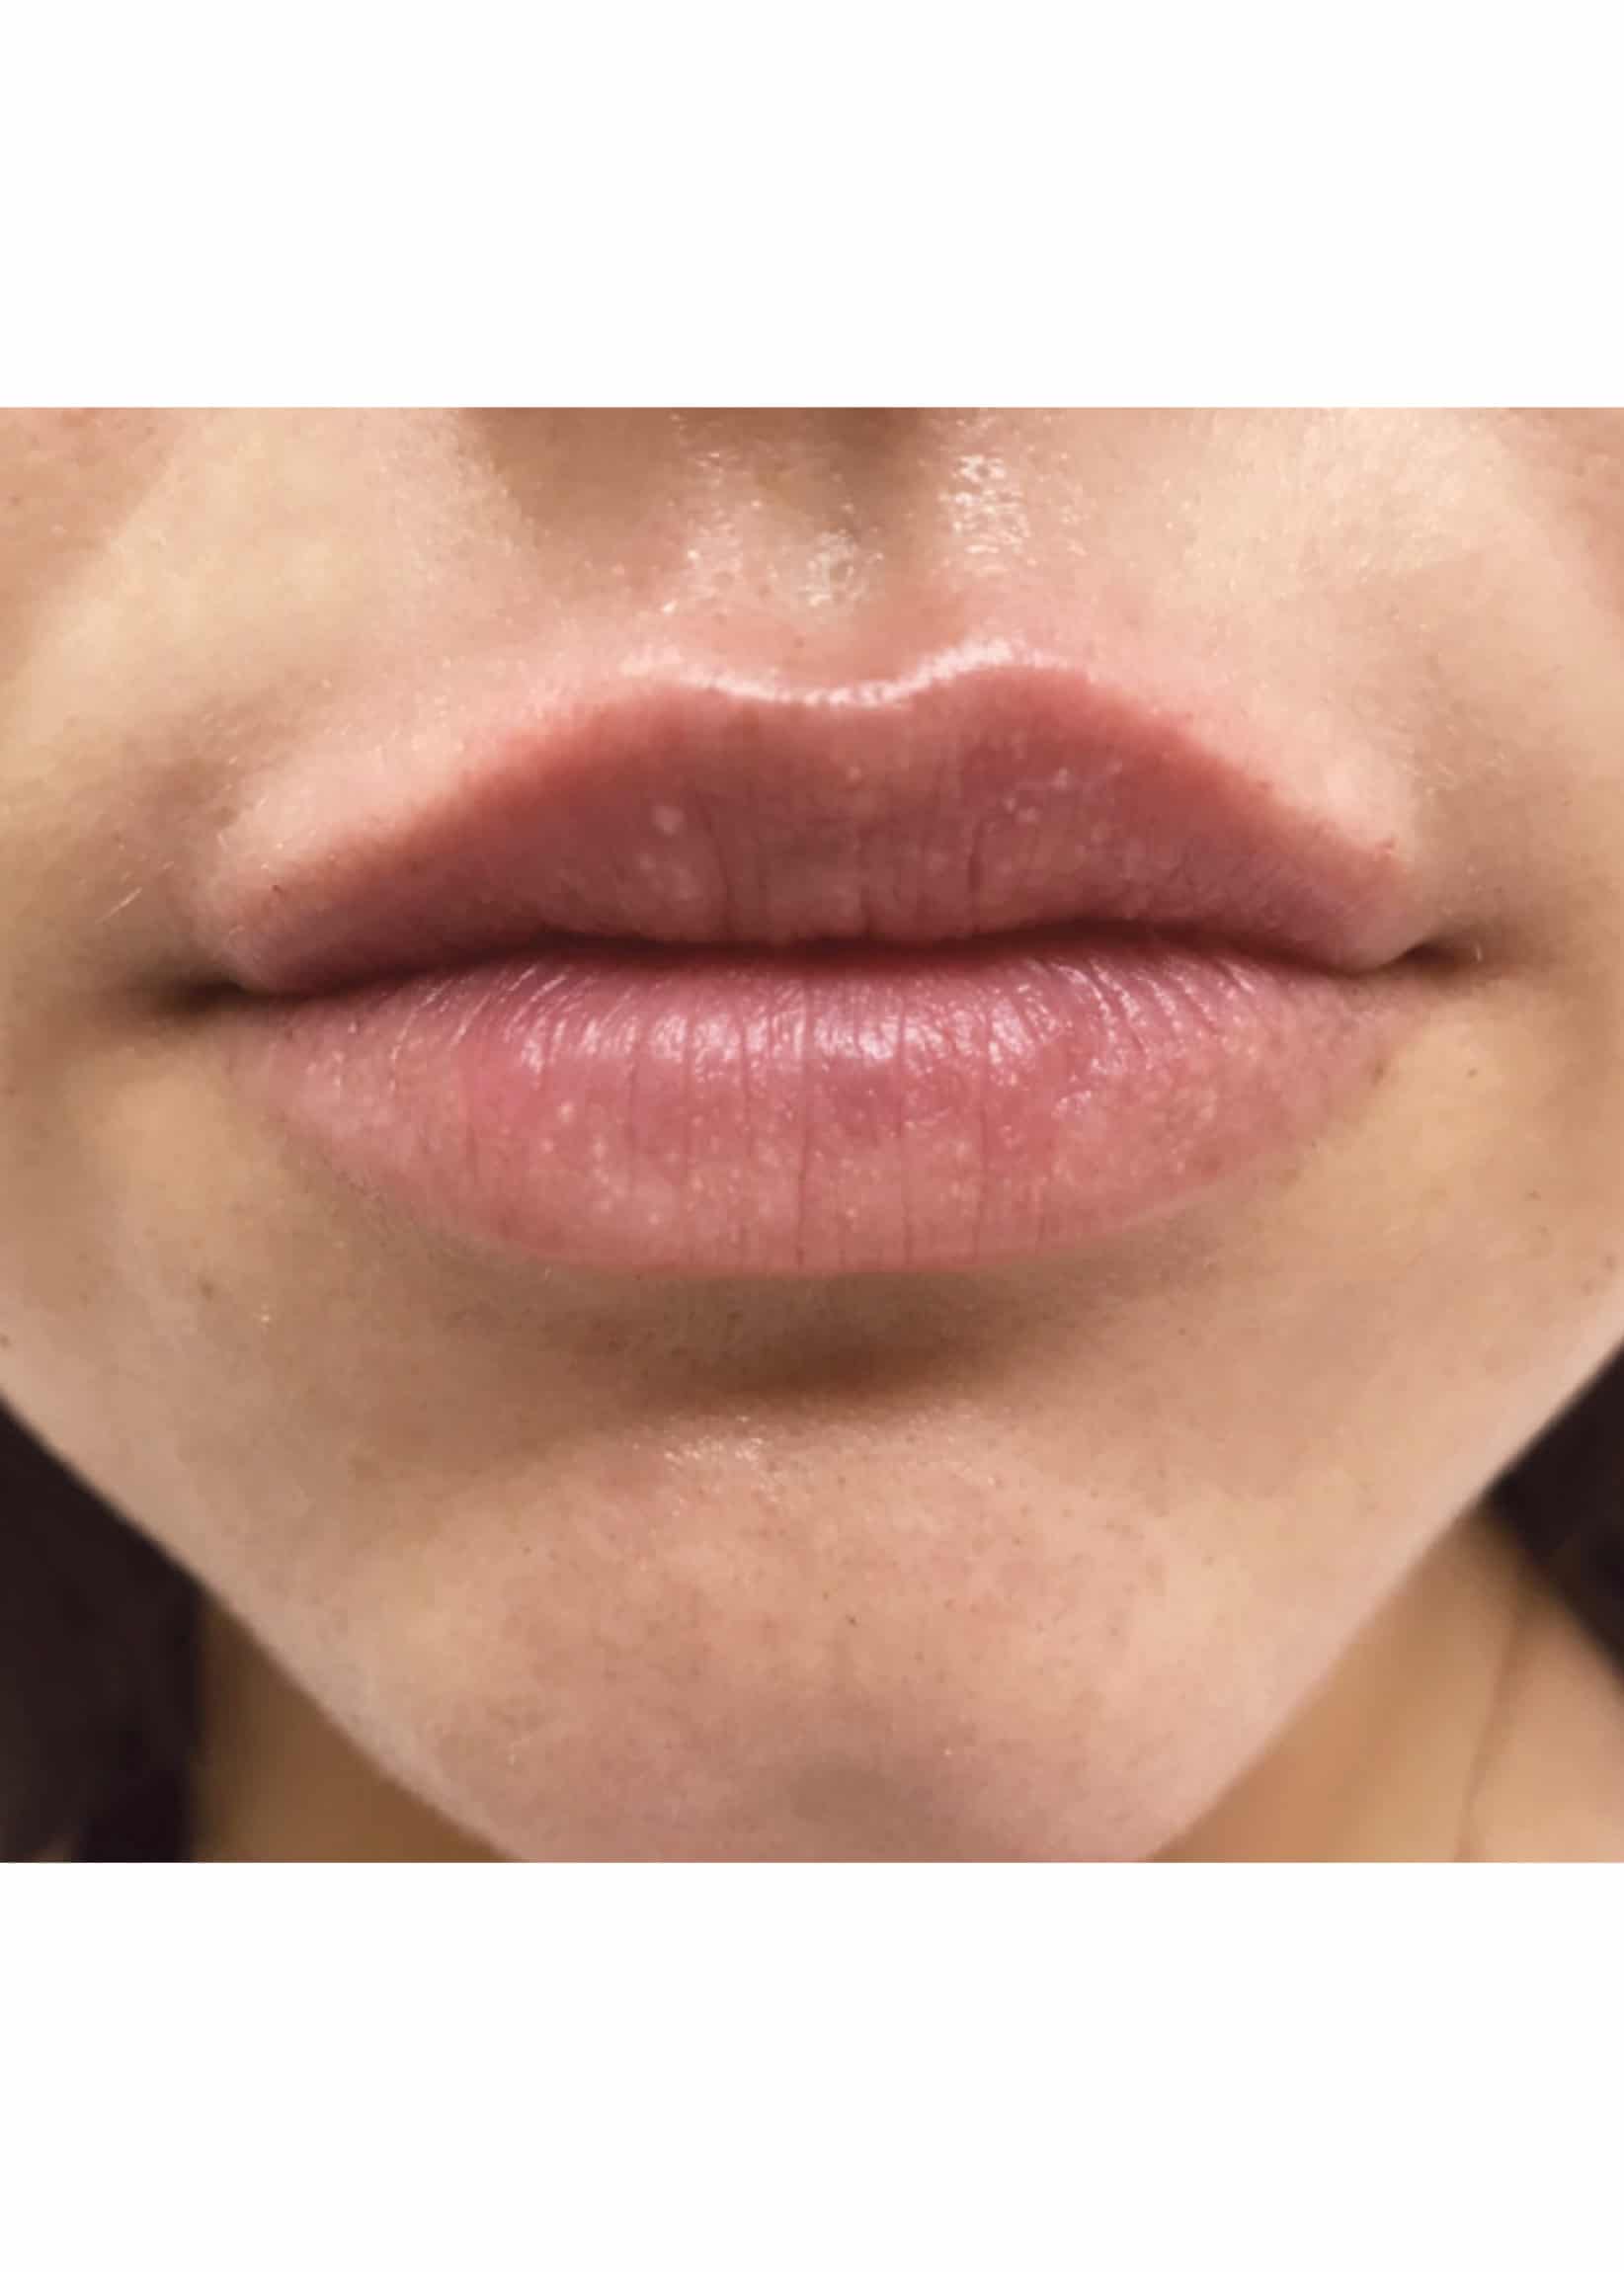 TheSkinCenter ProviderPages JonnaBlum LipFiller After 3 scaled 1